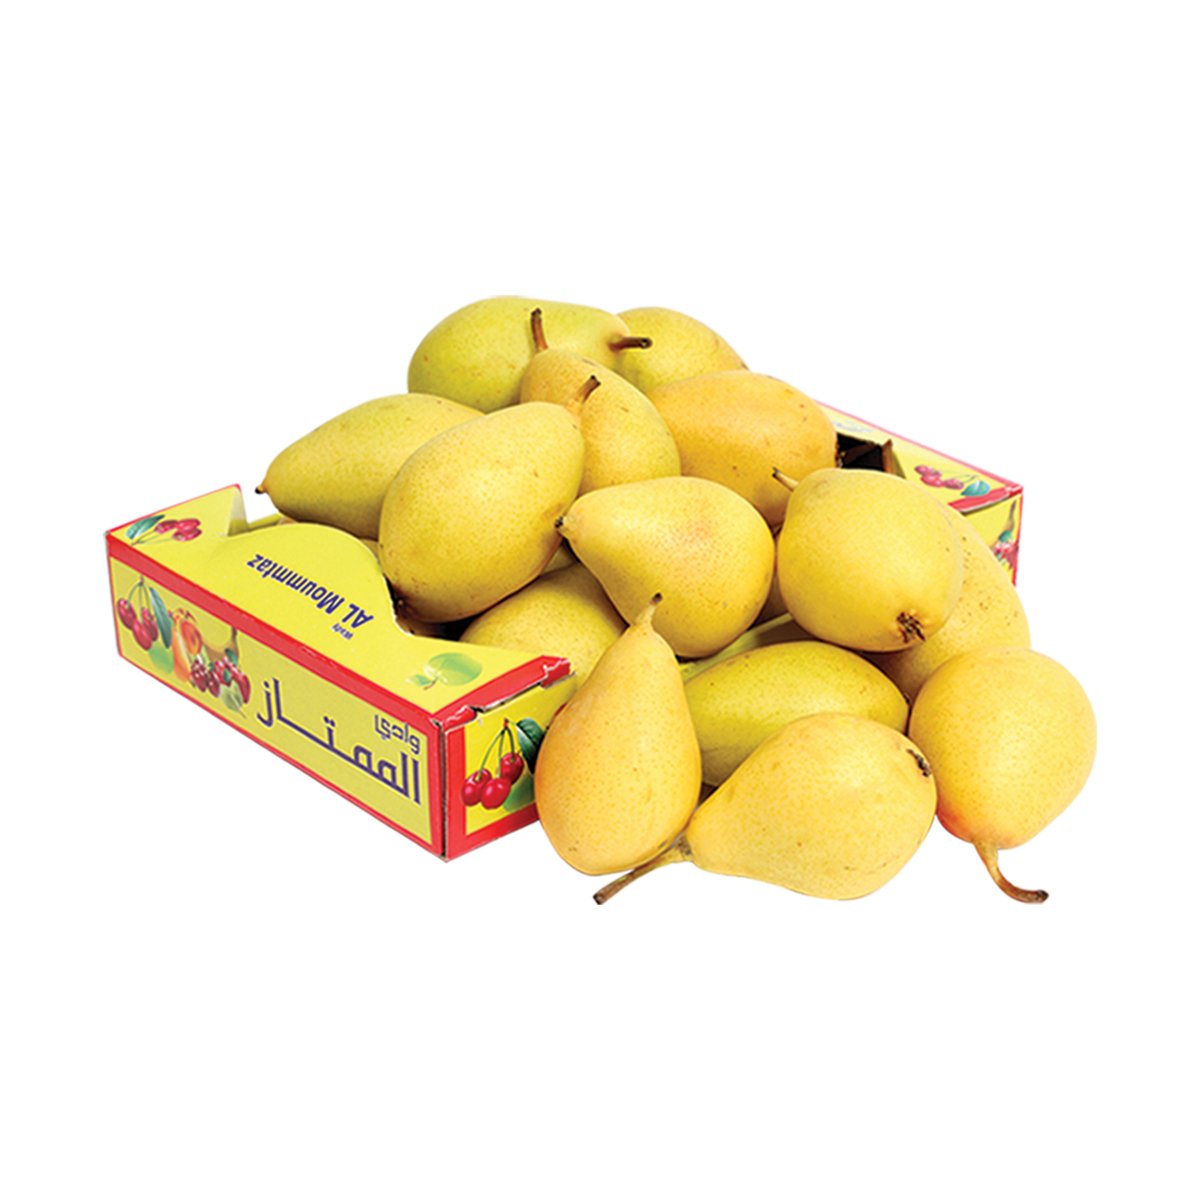 Pears Box 800g Approx. Weight